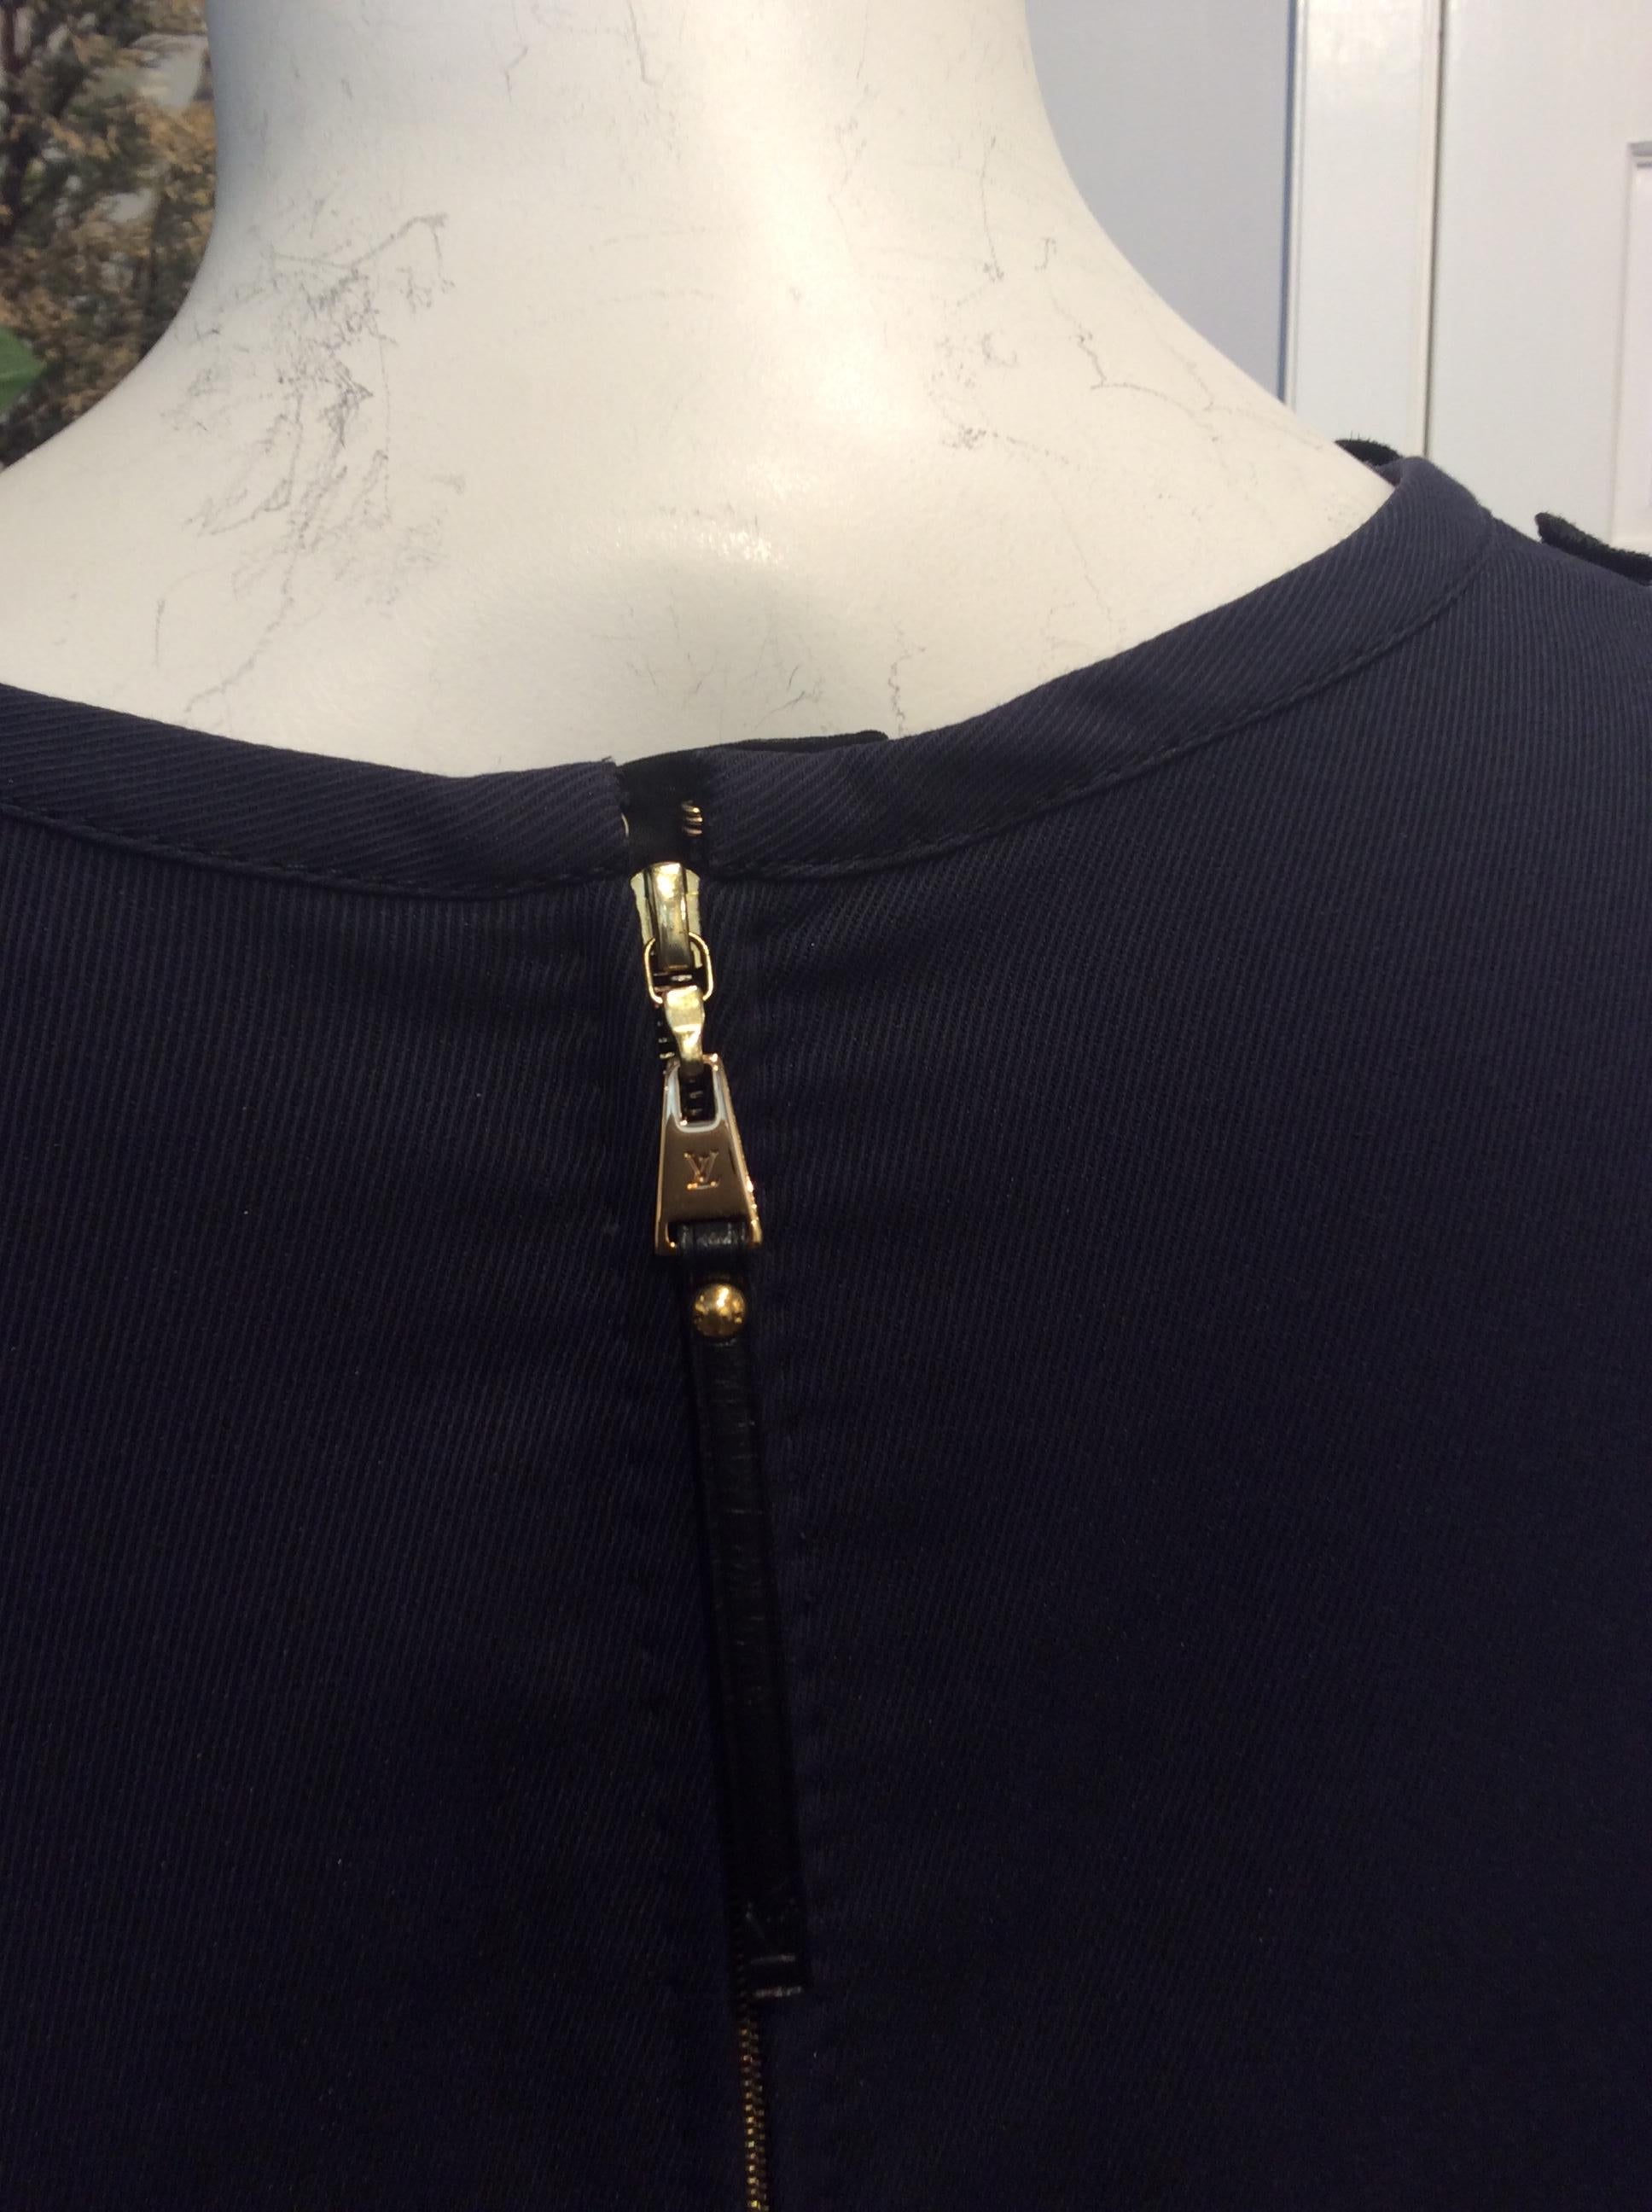 Louis Vuitton Navy and Black Semi Sheer Top w/ Flowers and Beads Sz Fr38/Us6 For Sale 2